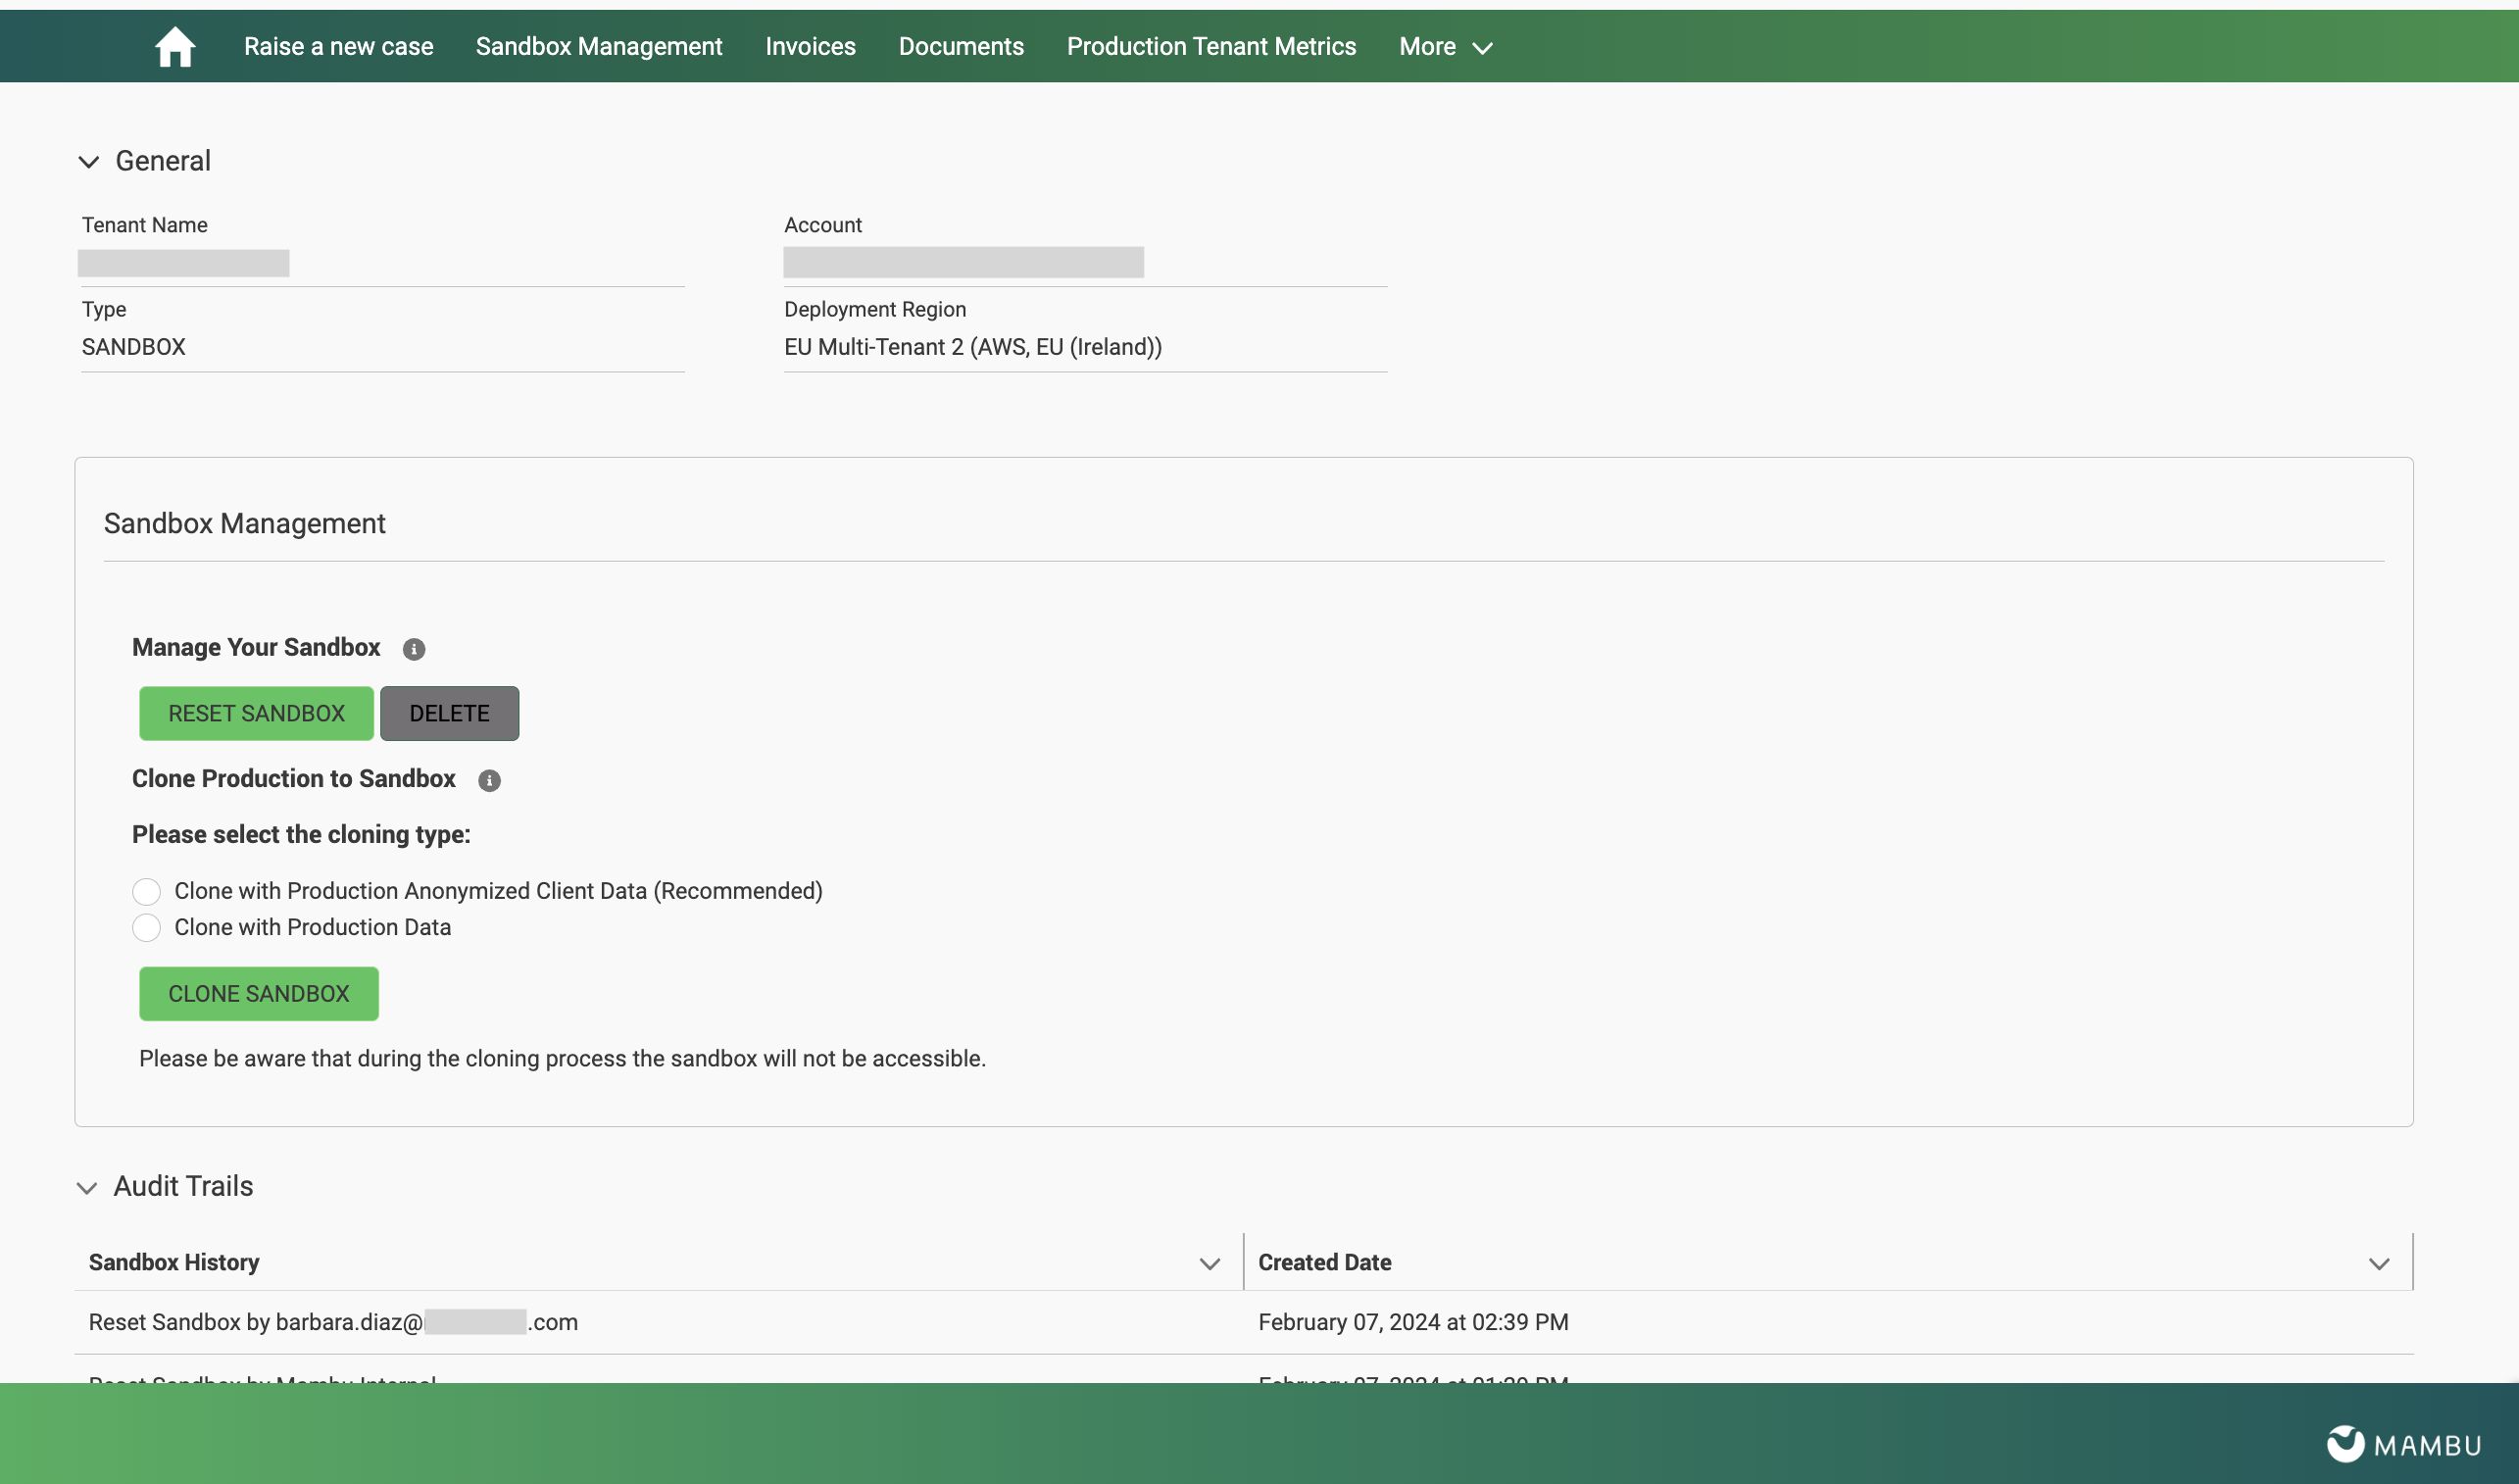 Customer Service Portal - New Sandbox Management with Audit Trail.png